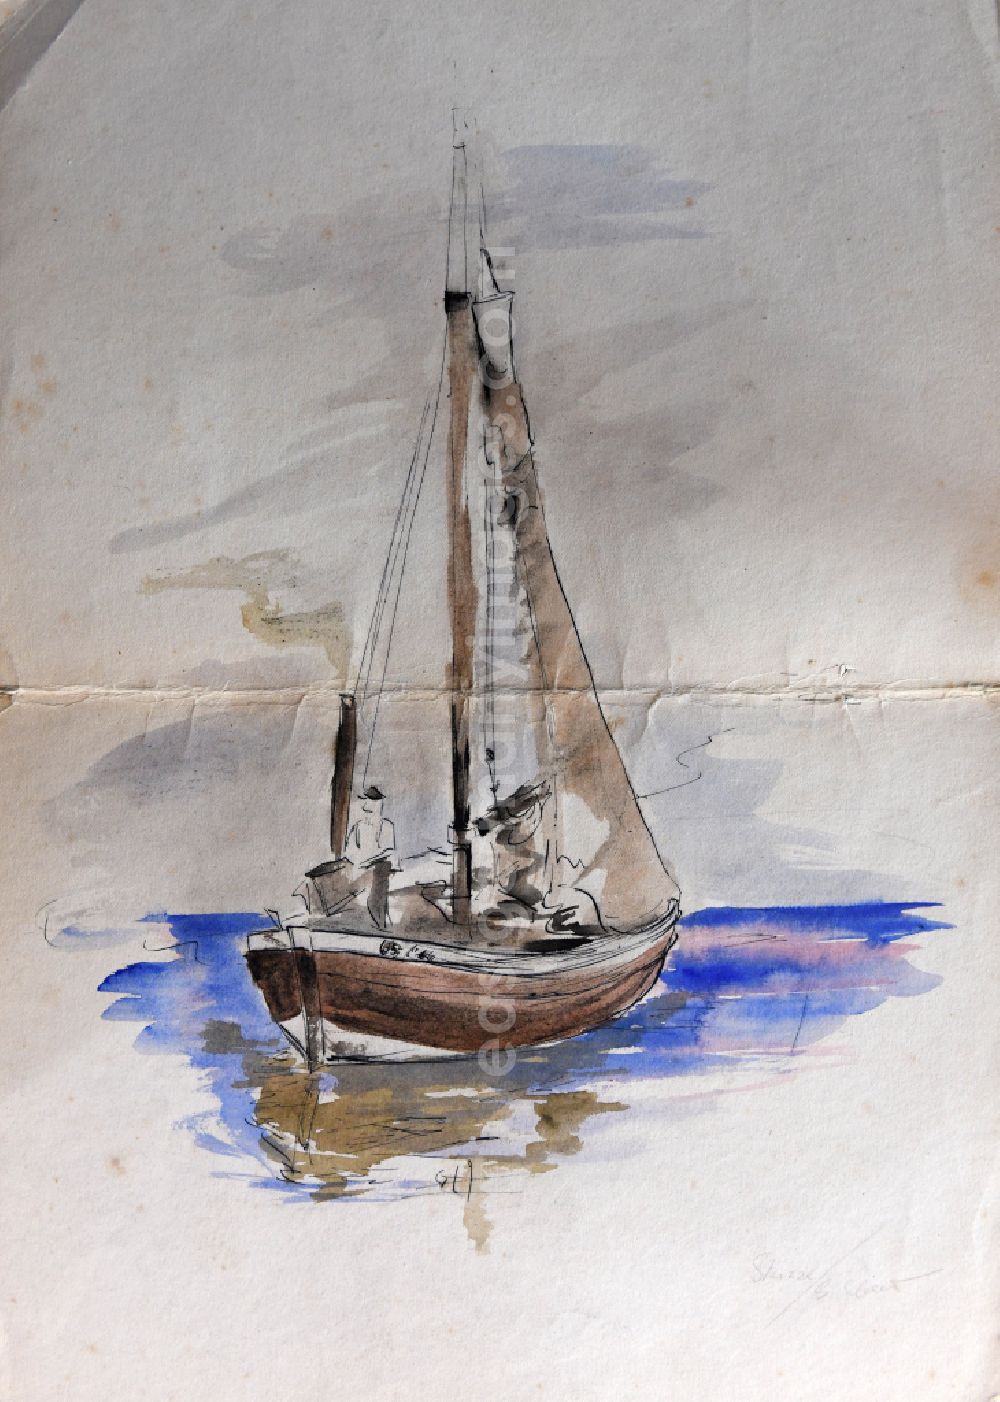 GDR photo archive: Stralsund - VG Image free work: Colored pencil drawing Sailboat on the Baltic Sea by the artist Siegfried Gebser in Stralsund in the state Mecklenburg-Western Pomerania on the territory of the former GDR, German Democratic Republic